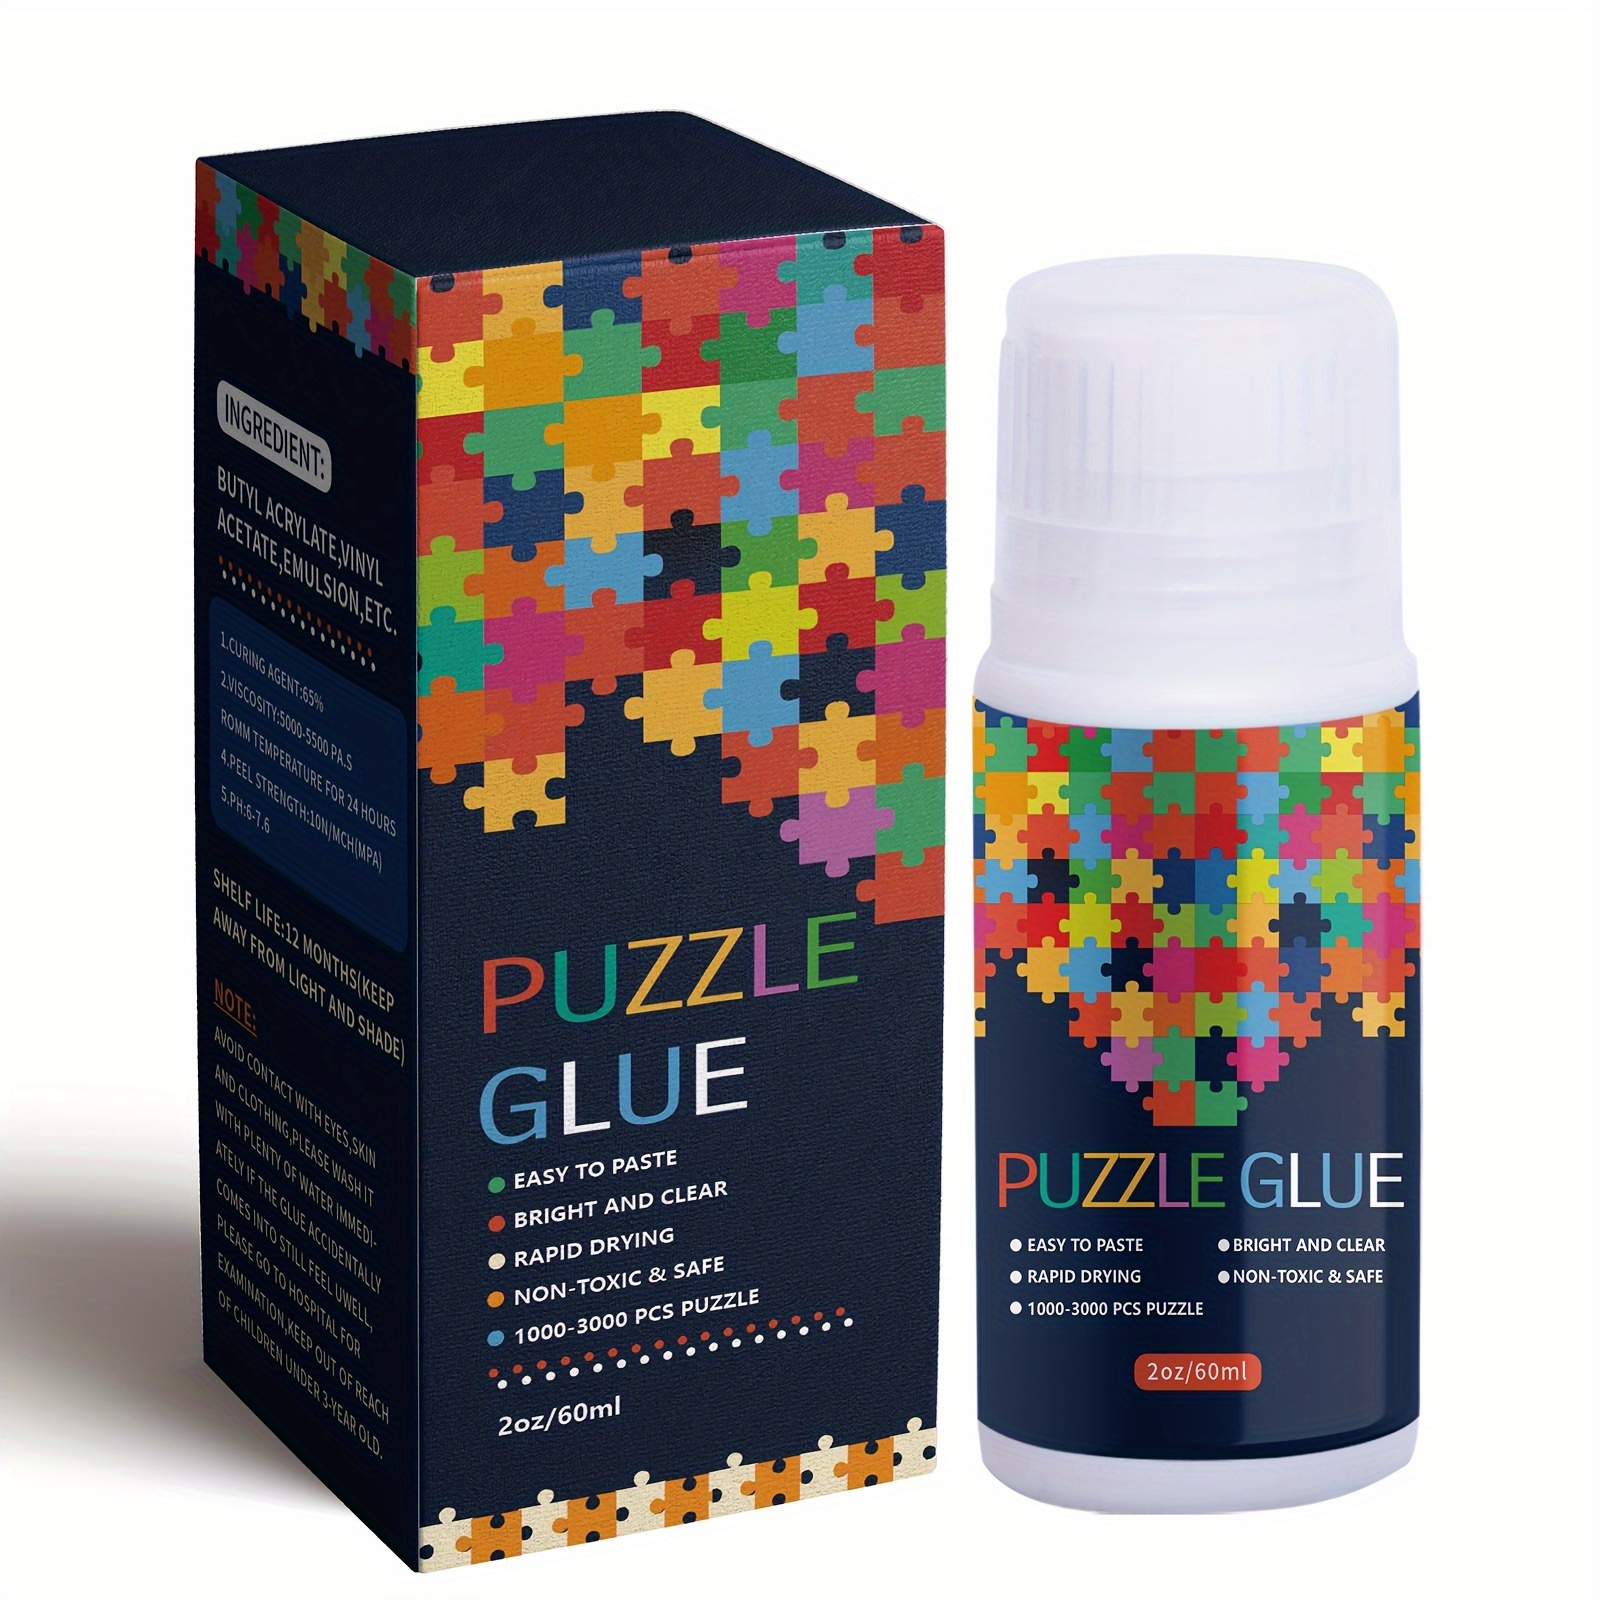 Ravensburger Puzzle Glue Conserver - Suitable For Up To 1000 Piece